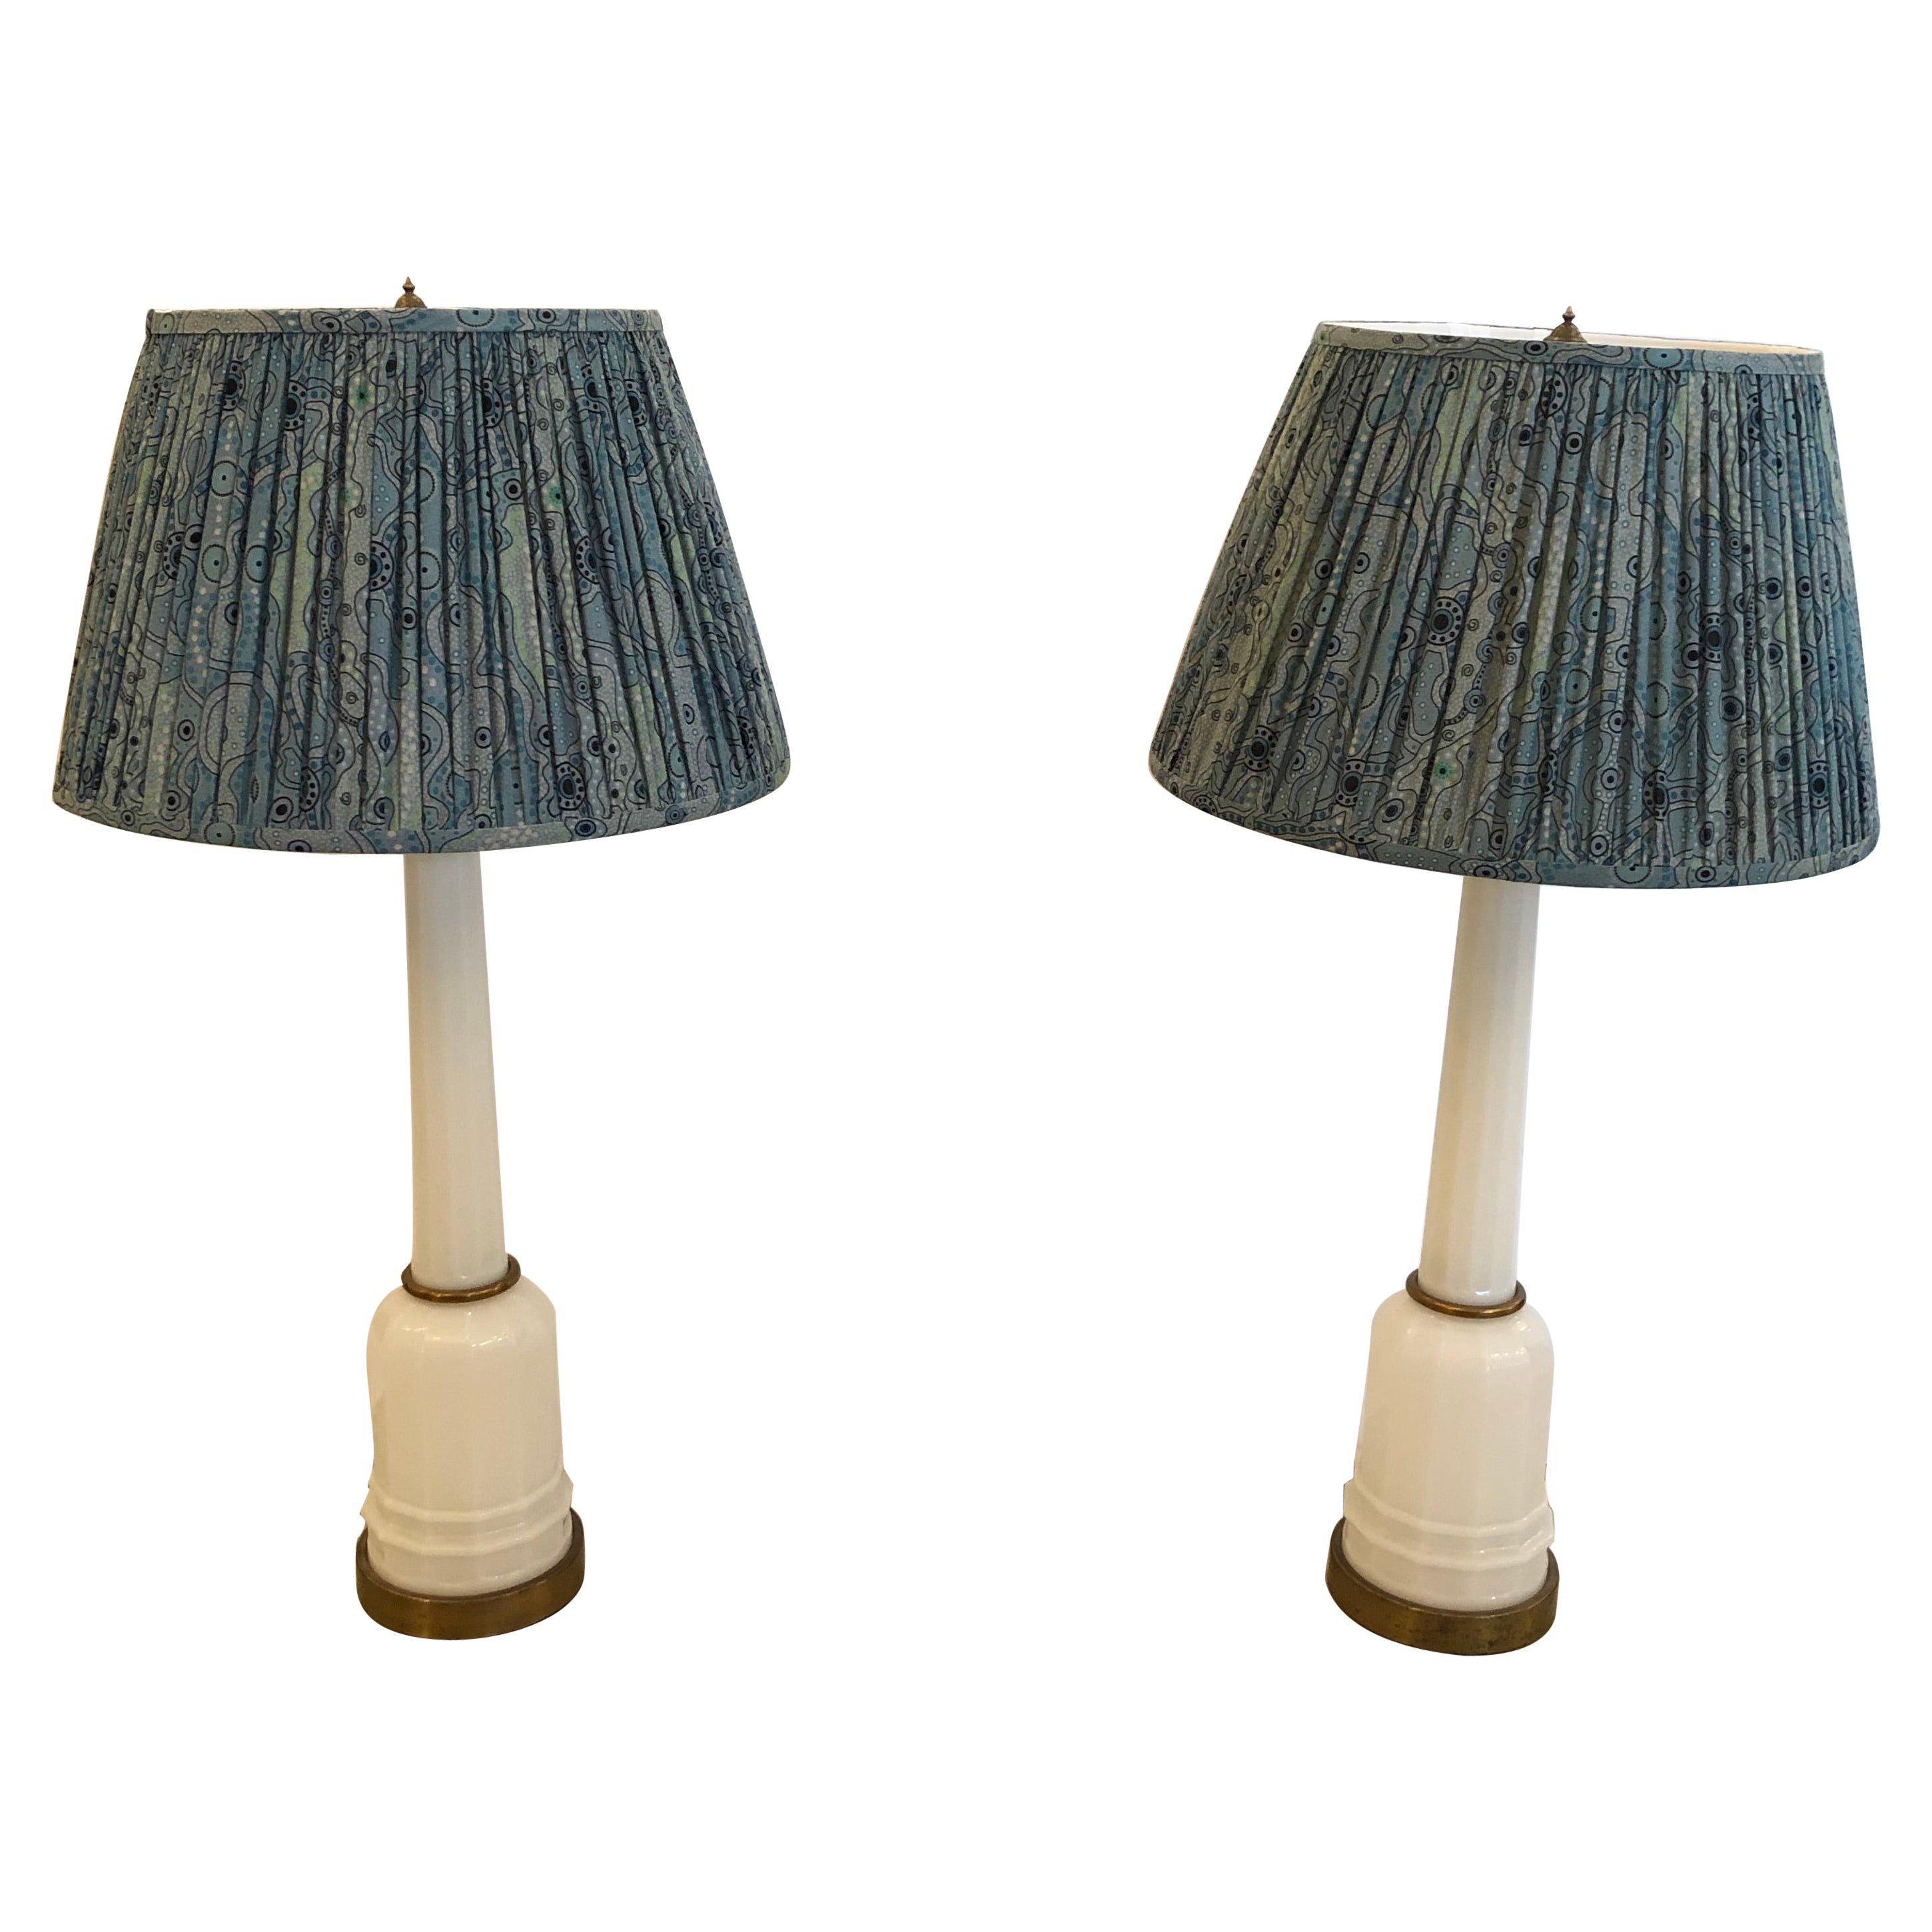 Tall Vintage Opaline Milk Glass & Brass Table Lamps with Fabric Shades